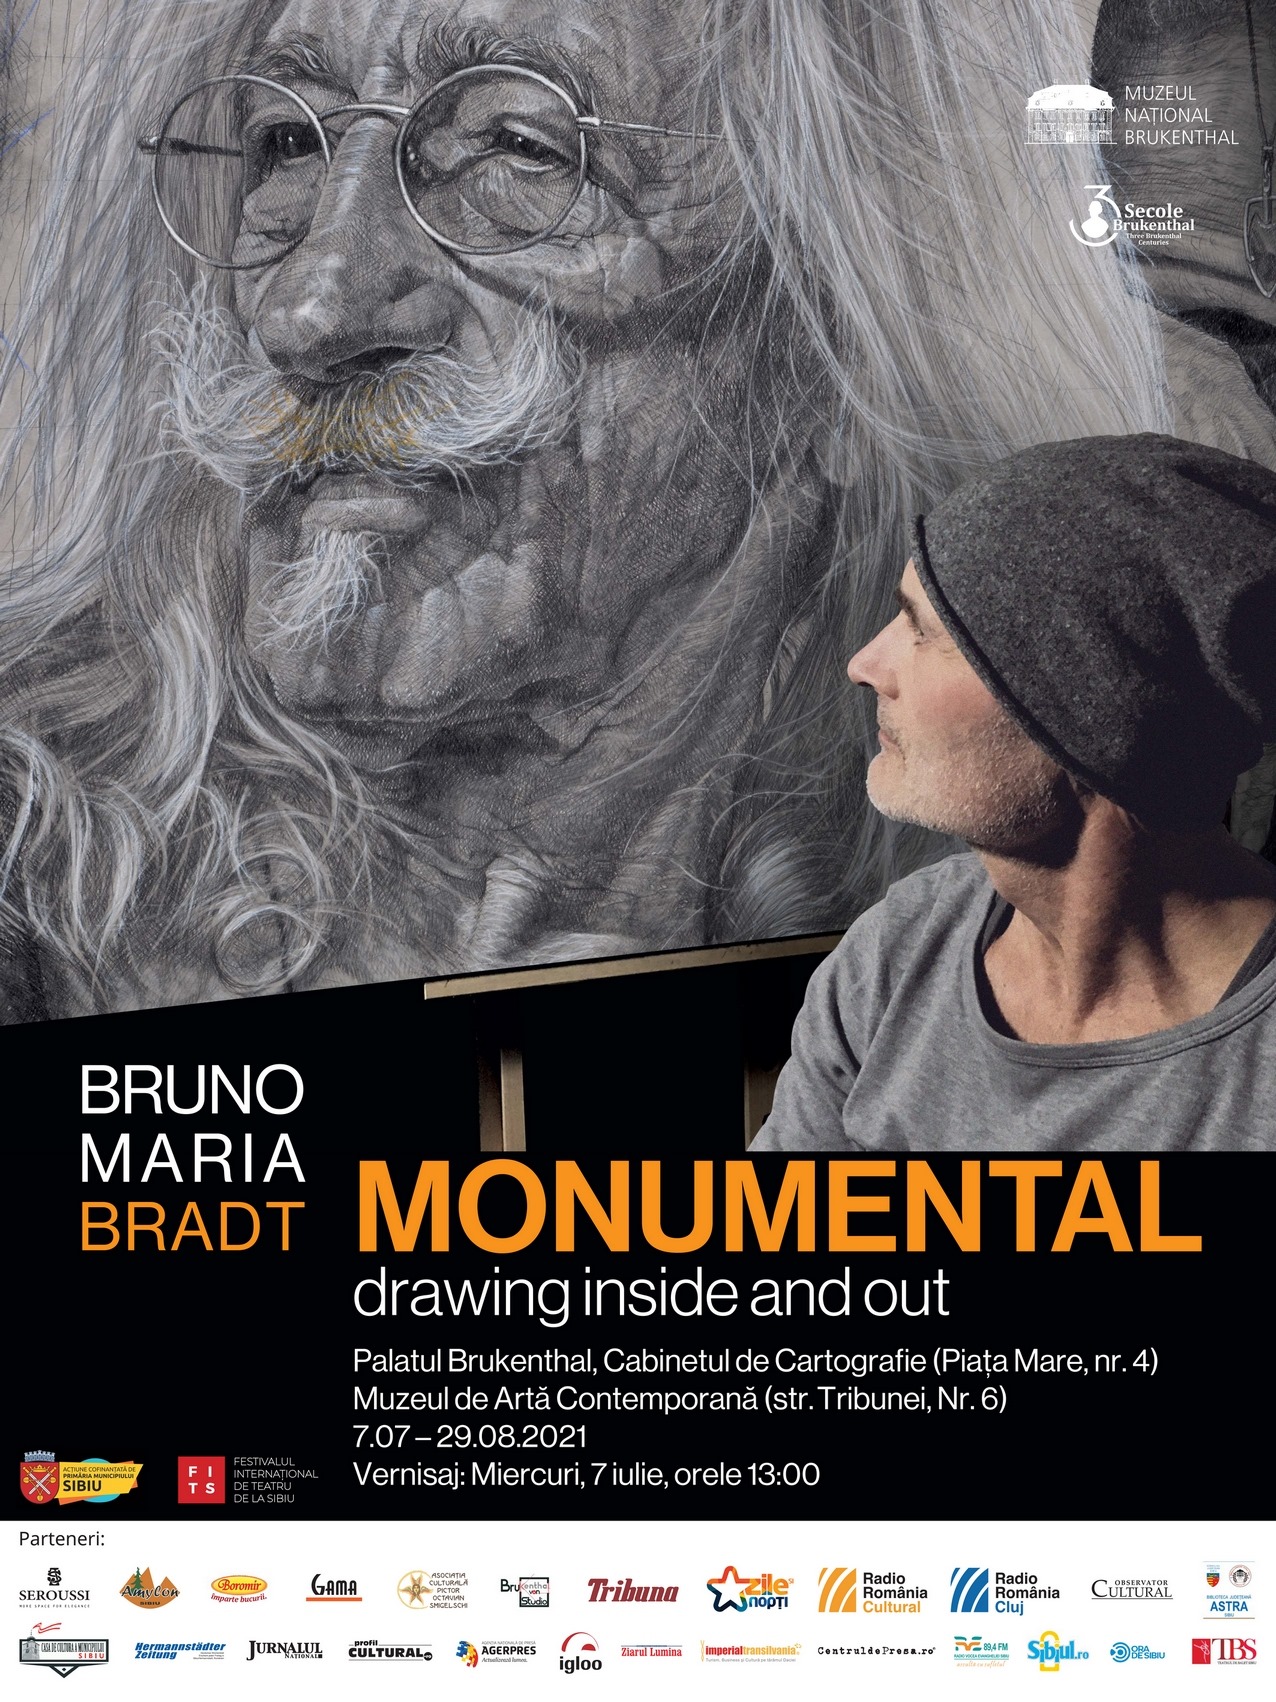 Exhibition duplex: Bruno Maria Bradt: Monumental - Drawing inside and out